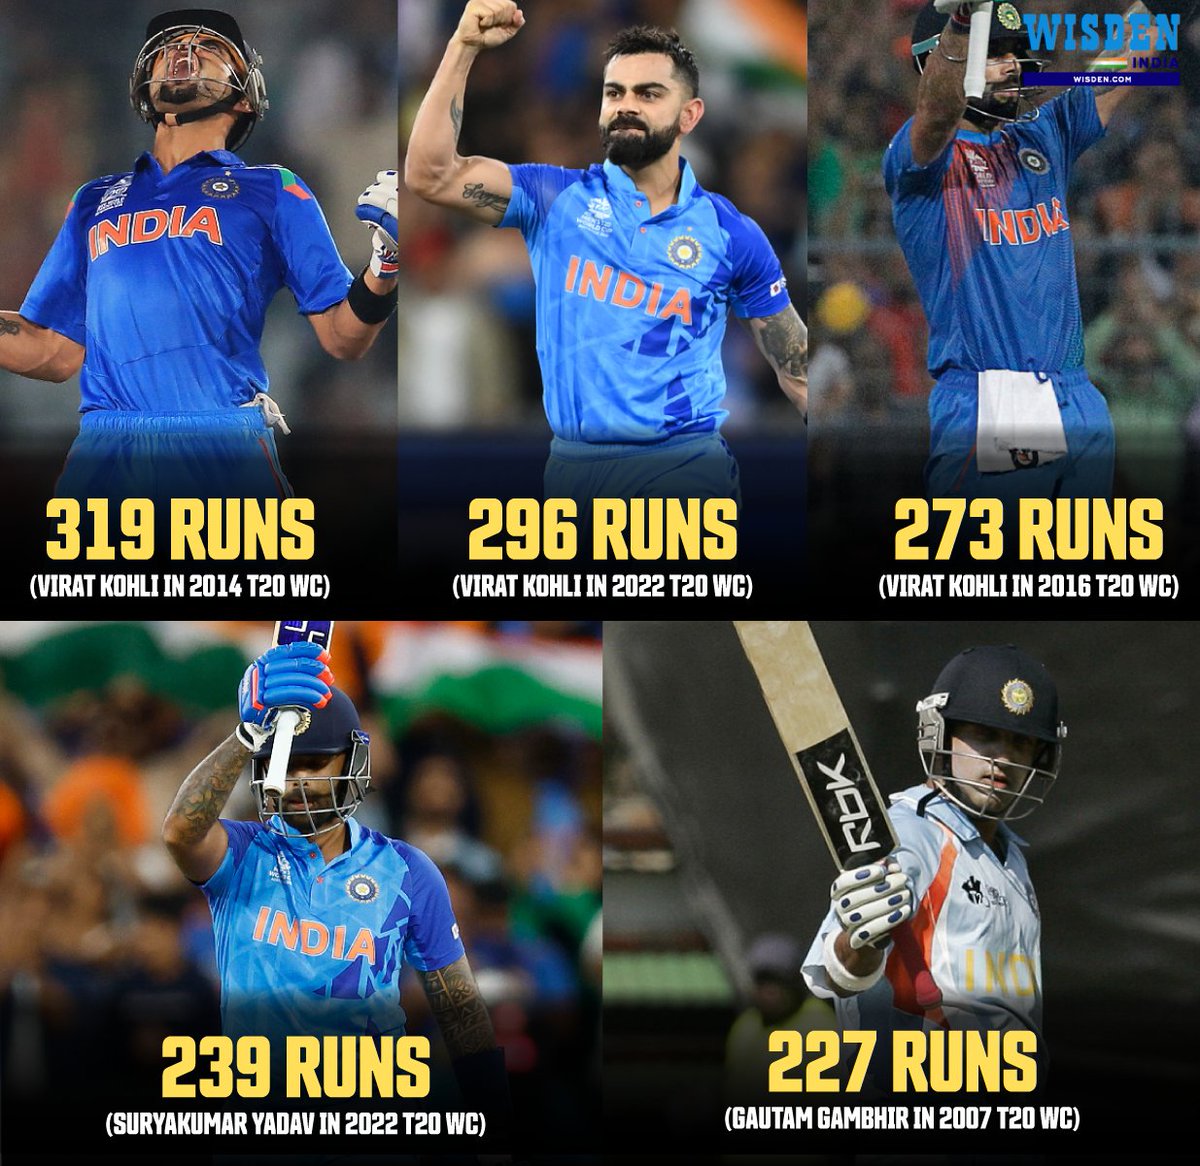 Virat Kohli in 2014 T20 WC ✅ Virat Kohli in 2022 T20 WC ✅ Virat Kohli in 2016 T20 WC ✅ Suryakumar Yadav in 2022 T20 WC ✅ Gautam Gambhir in 2007 T20 WC ✅ An elite trio of India batters with the most runs in a single edition of the men's T20 World Cup 🔥 #ViratKohli #T20WC